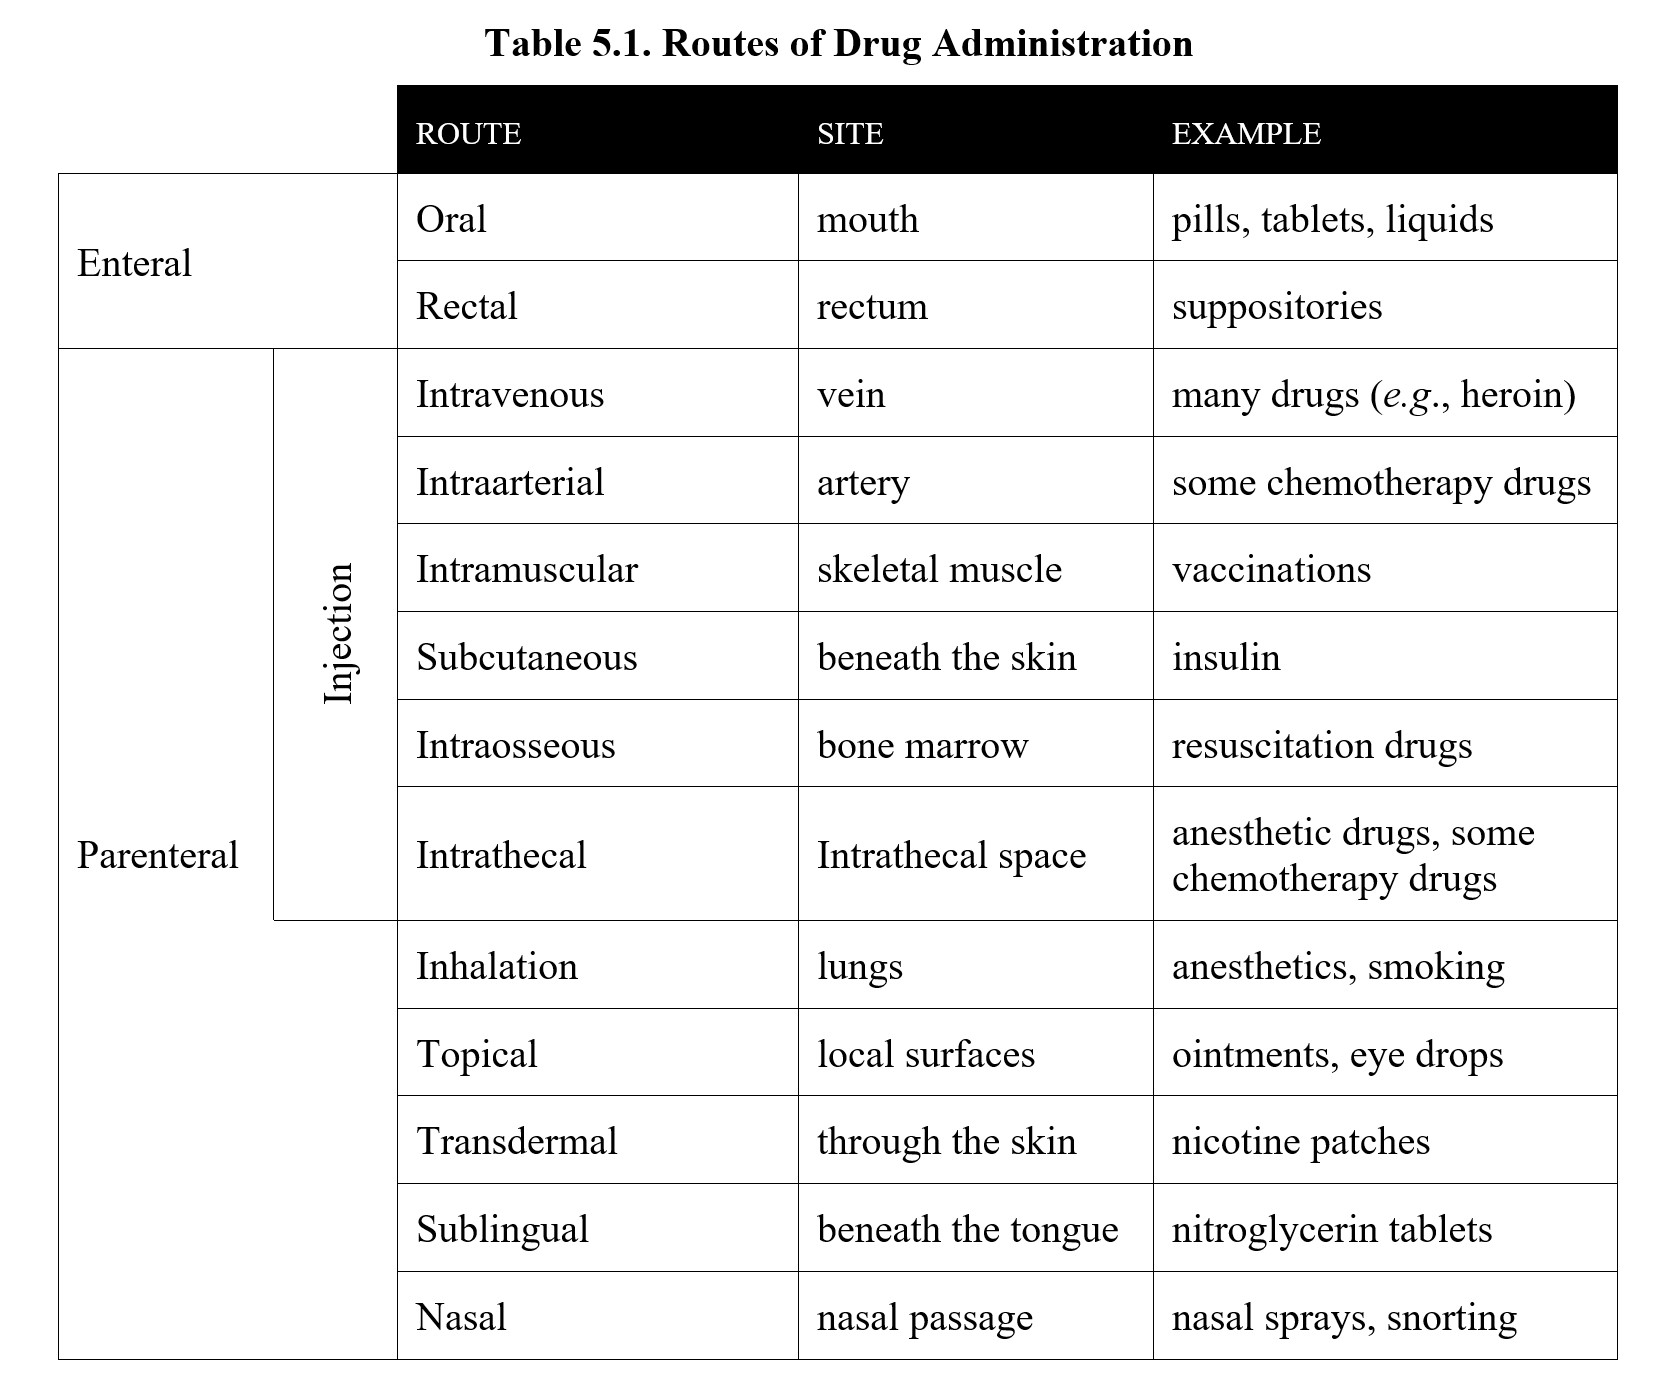 assignment on routes of drug administration